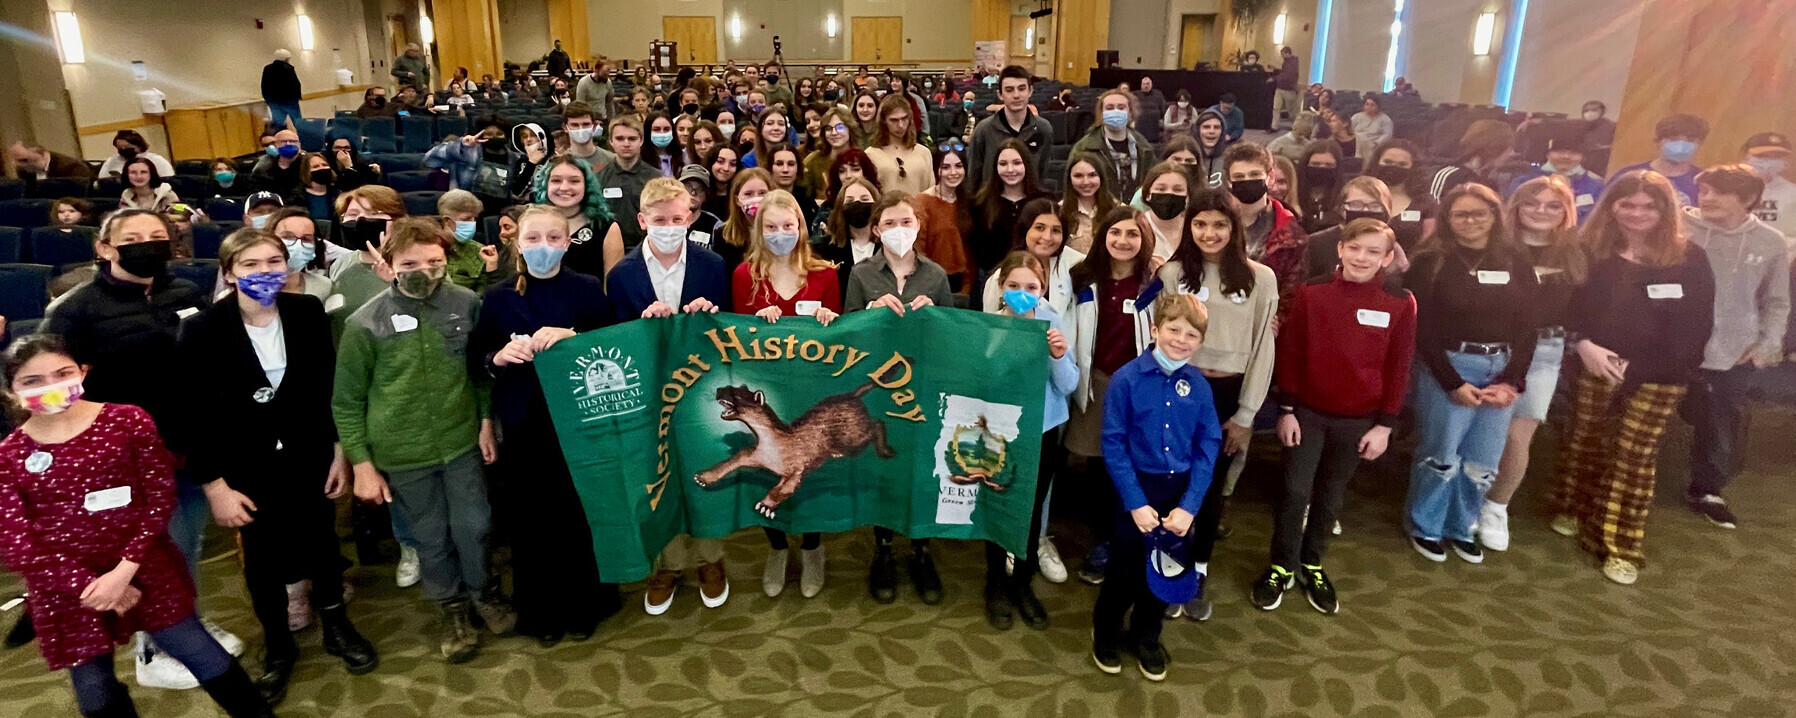 Large group of students with Vermont History Day banner.